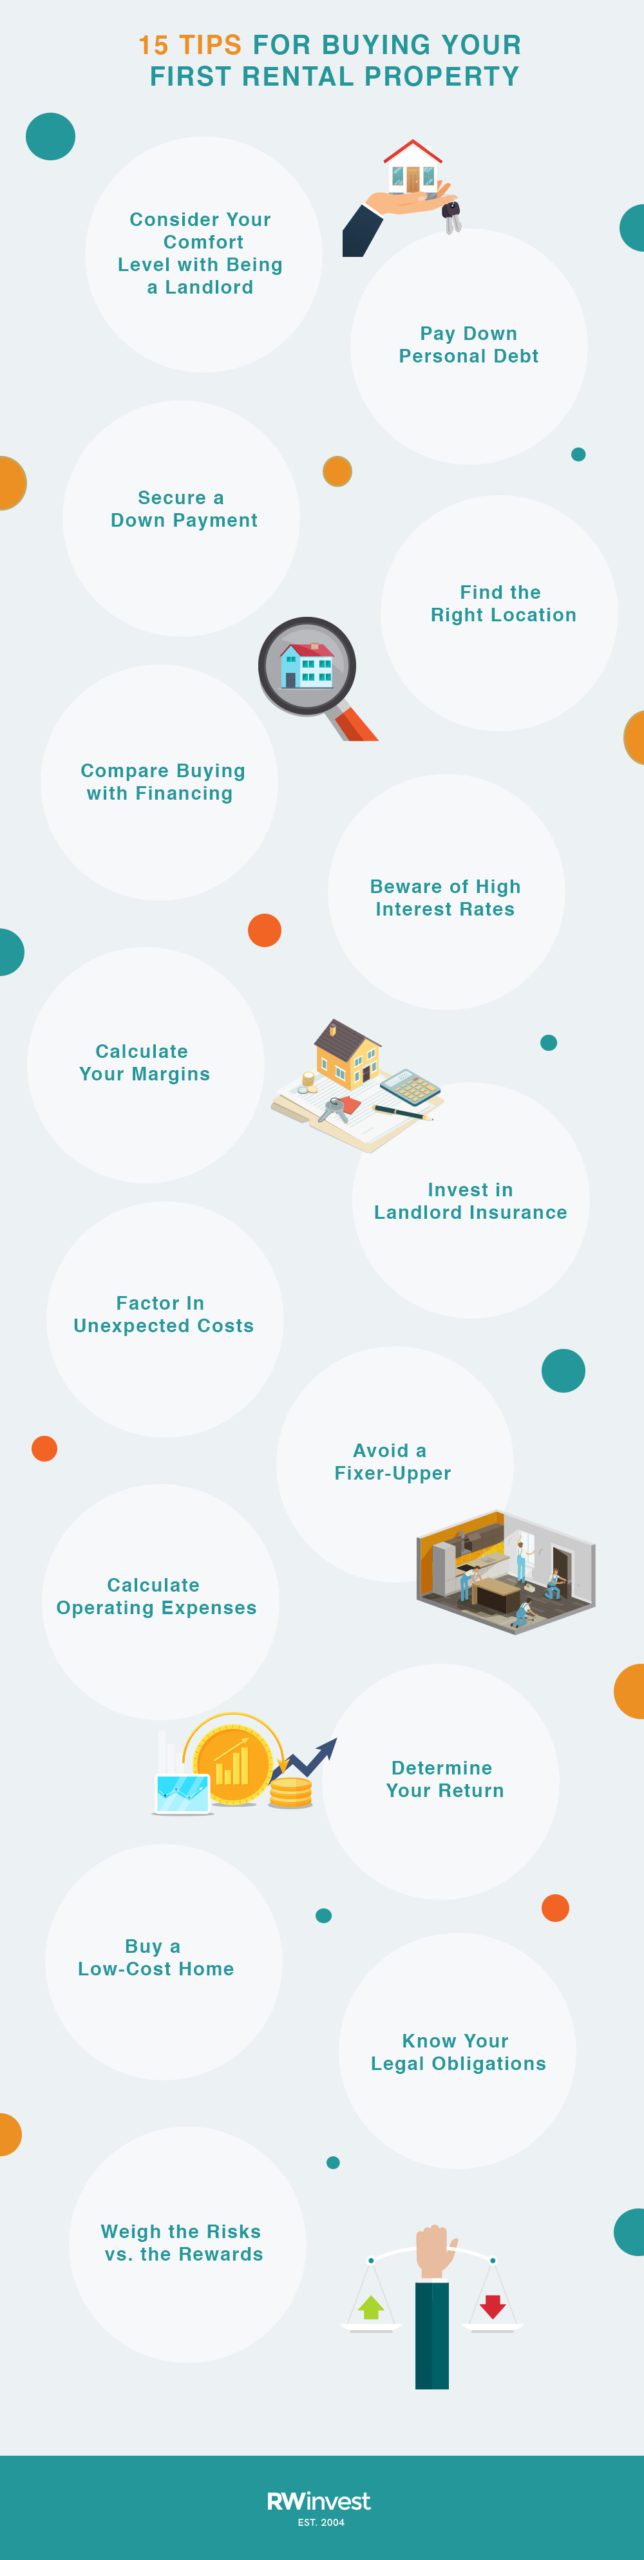 15 Top Tips for Buying Your First Rental Property infographic